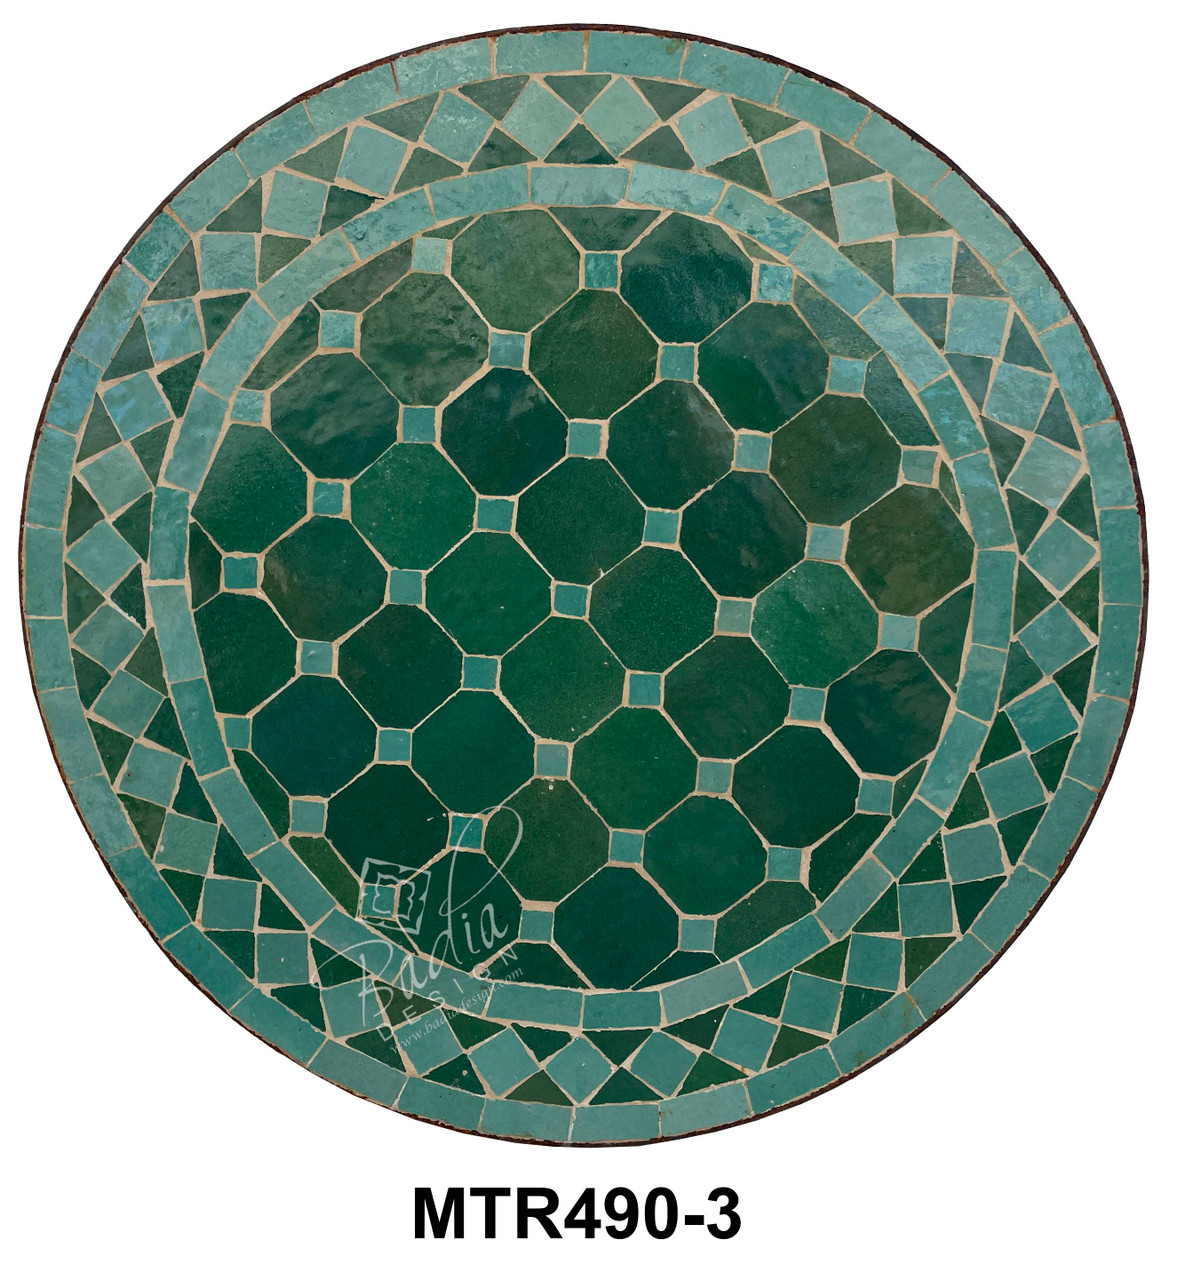 20 Inch Round Tile Table Top - MTR490